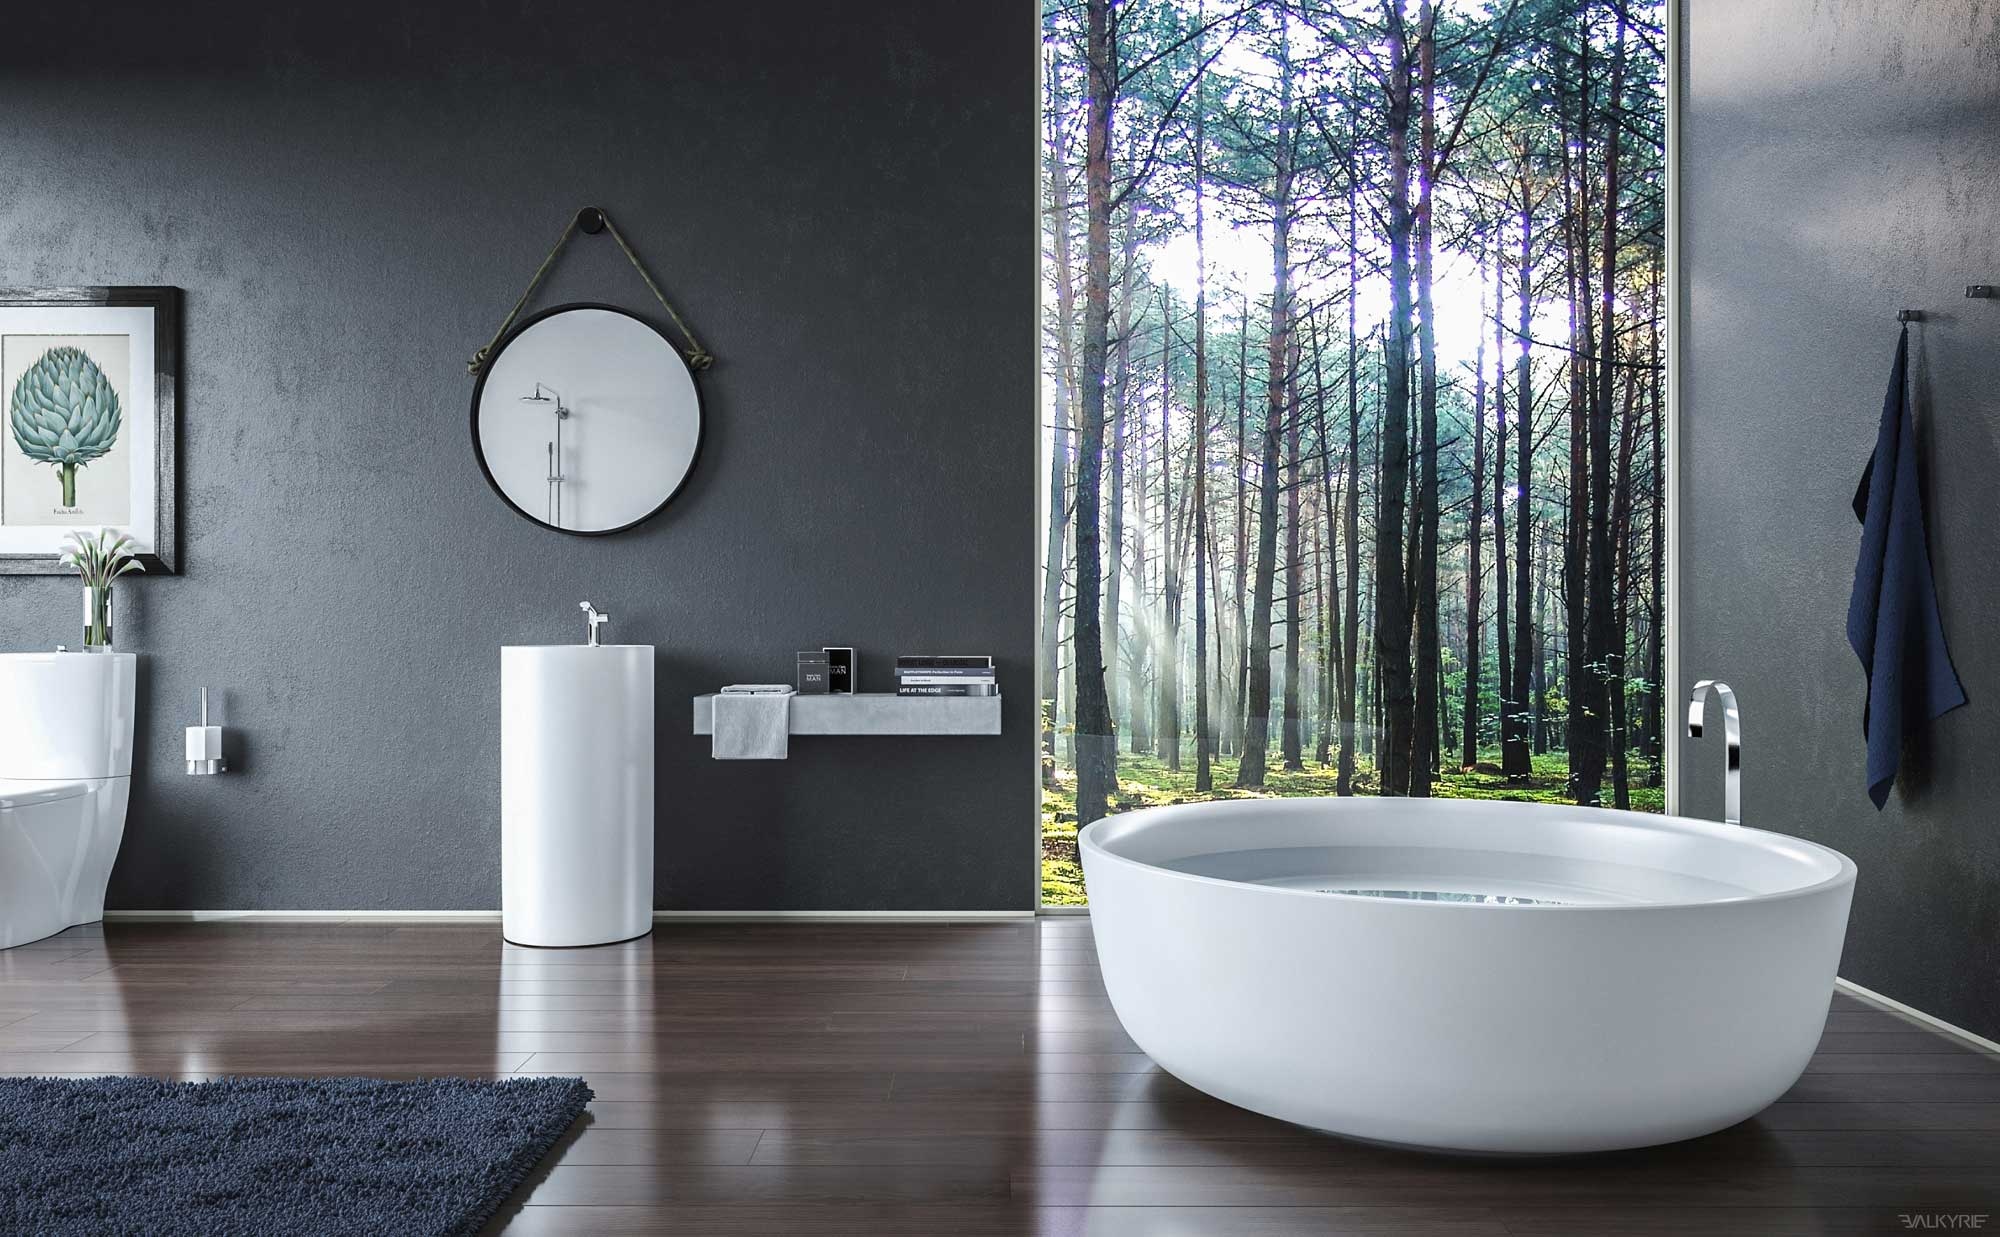 Bathroom design with a beautiful view "width =" 2000 "height =" 1237 "srcset =" https://mileray.com/wp-content/uploads/2020/05/1588515205_638_Luxury-Bathroom-Decor-With-Beautiful-and-Trendy-Design-Which-Looks.jpeg 2000w, https: // myfashionos. com / wp-content / uploads / 2016/09 / Valkyrie-Studio3-300x186.jpeg 300w, https://mileray.com/wp-content/uploads/2016/09/Valkyrie-Studio3-768x475.jpeg 768w, https: //mileray.com/wp-content/uploads/2016/09/Valkyrie-Studio3-1024x633.jpeg 1024w, https://mileray.com/wp-content/uploads/2016/09/Valkyrie-Studio3-356x220.jpeg 356w, https://mileray.com/wp-content/uploads/2016/09/Valkyrie-Studio3-696x430.jpeg 696w, https://mileray.com/wp-content/uploads/2016/09/Valkyrie-Studio3 -1068x661.jpeg 1068w, https://mileray.com/wp-content/uploads/2016/09/Valkyrie-Studio3-679x420.jpeg 679w "sizes =" (maximum width: 2000px) 100vw, 2000px